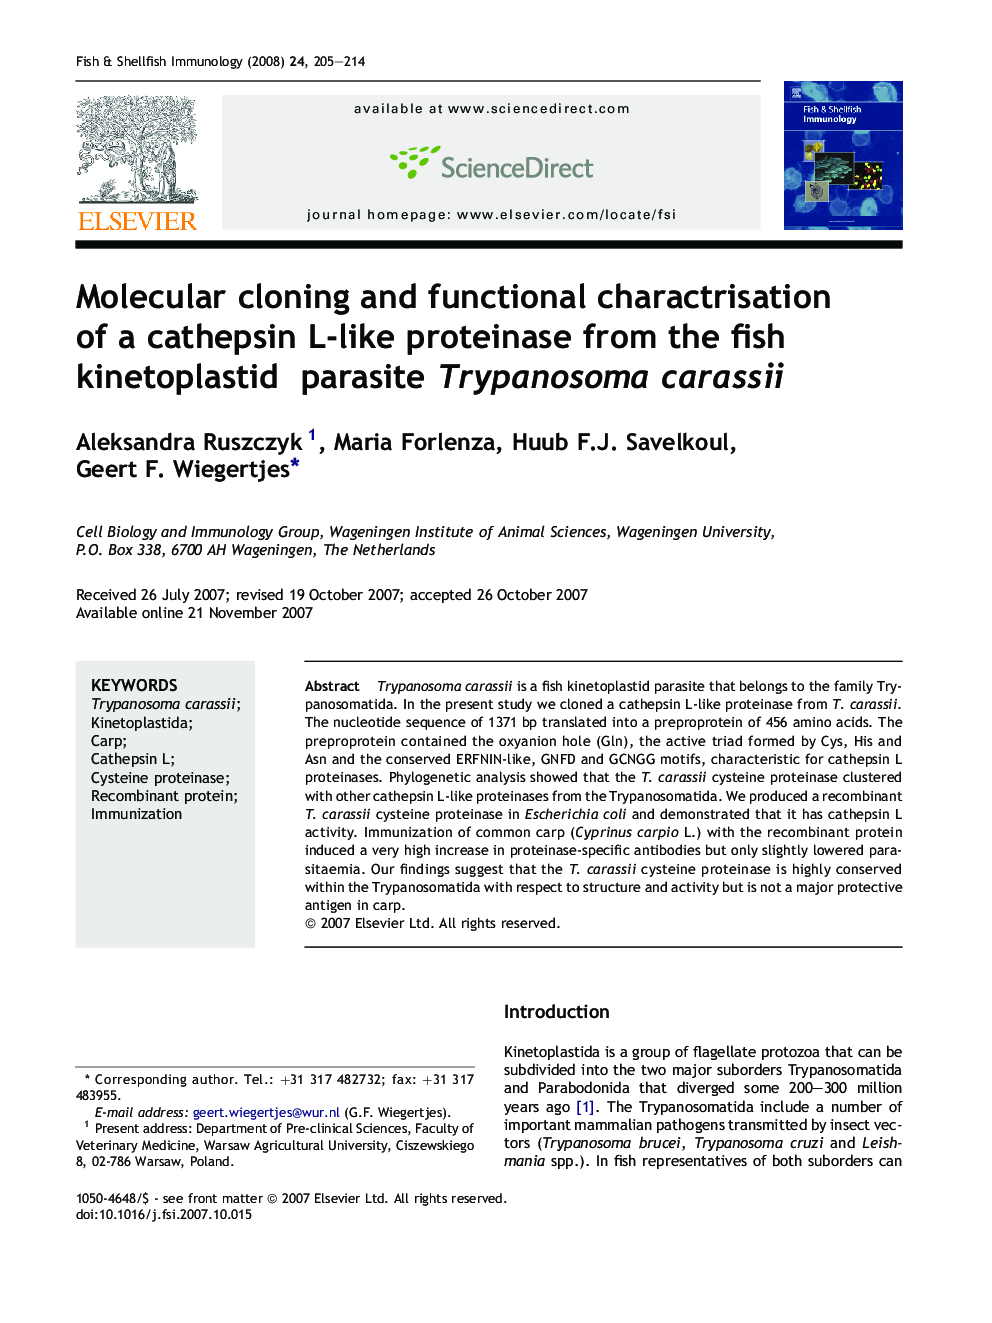 Molecular cloning and functional charactrisation of a cathepsin L-like proteinase from the fish kinetoplastid parasite Trypanosoma carassii